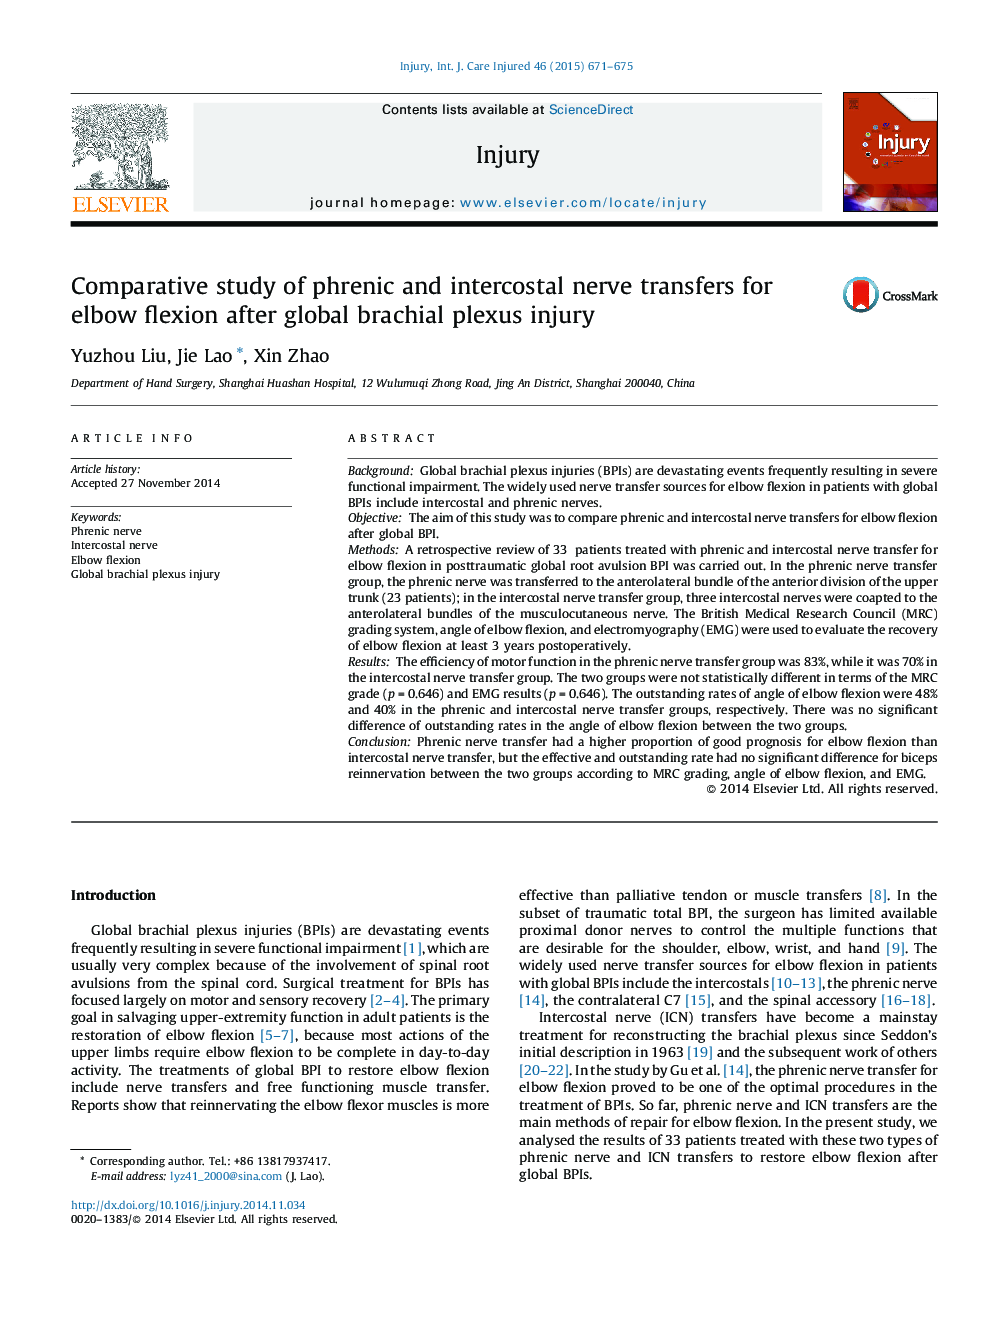 Comparative study of phrenic and intercostal nerve transfers for elbow flexion after global brachial plexus injury